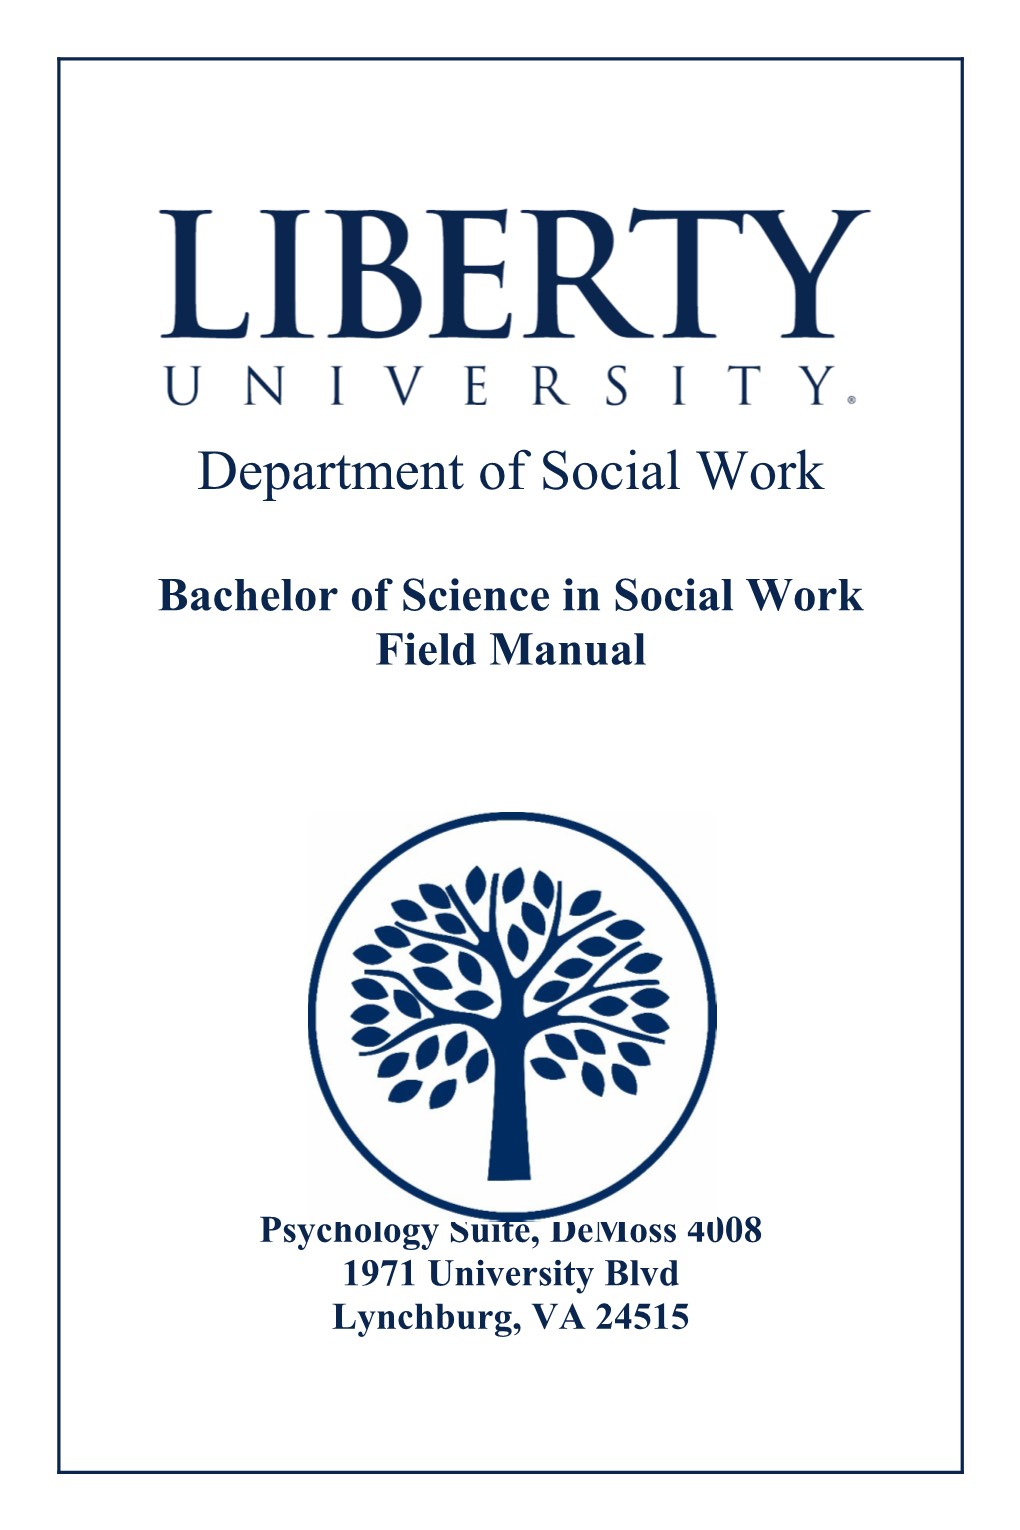 Bachelor of Science in Social Workfield Manual